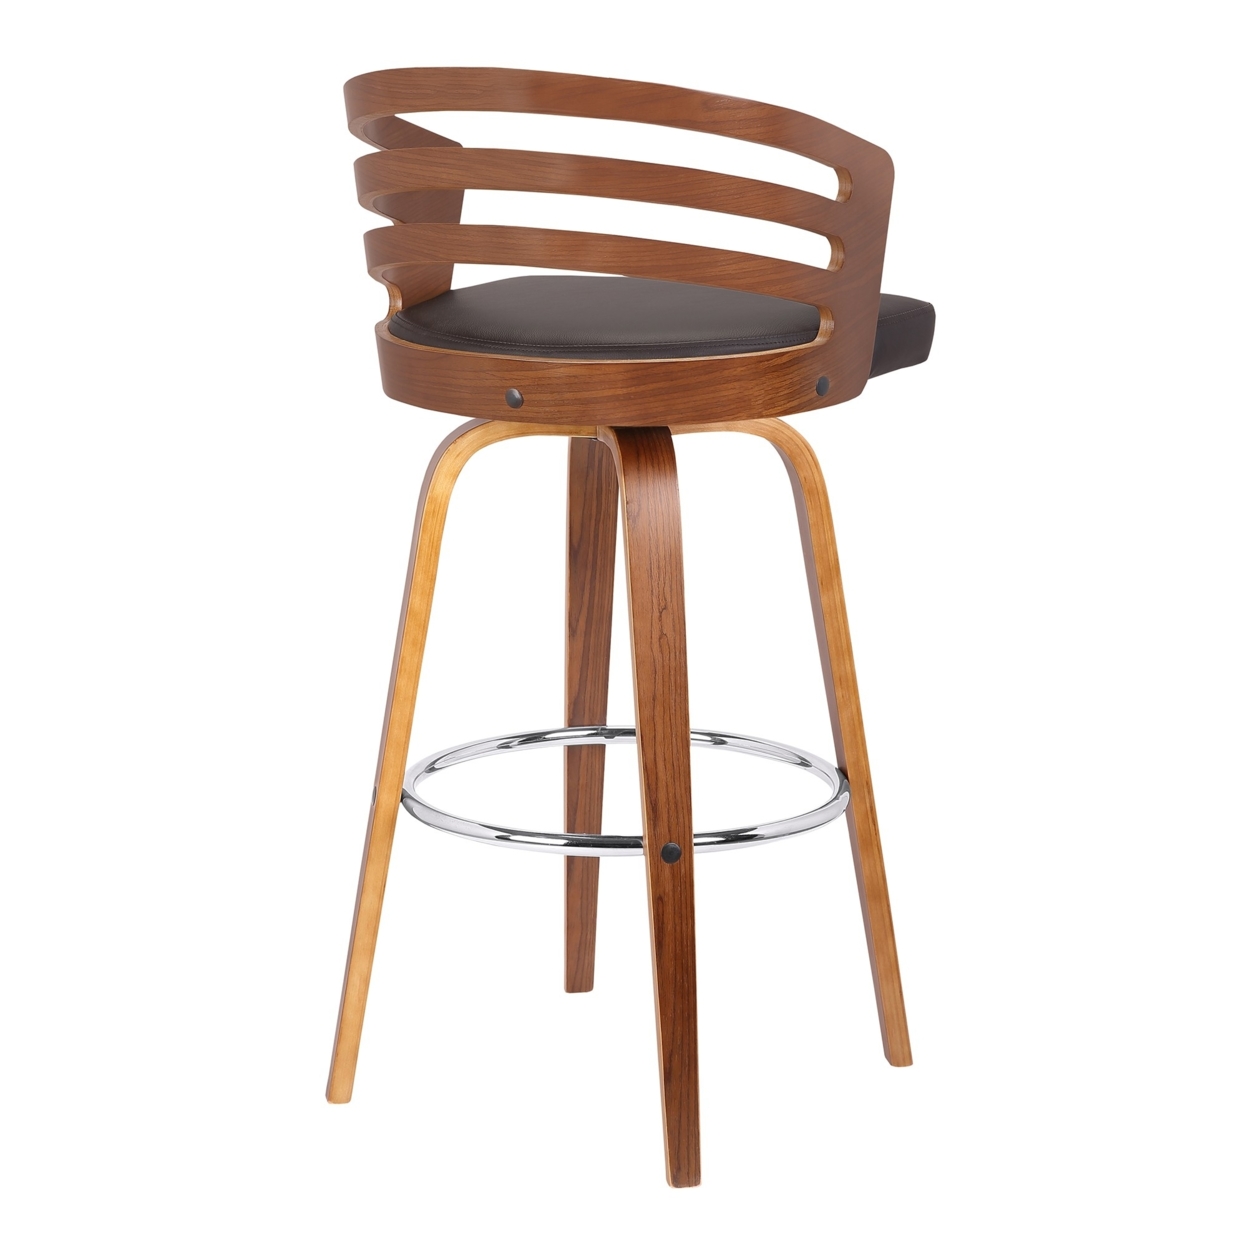 Leatherette Swivel Wooden Counter Stool With Curved Back, Brown- Saltoro Sherpi